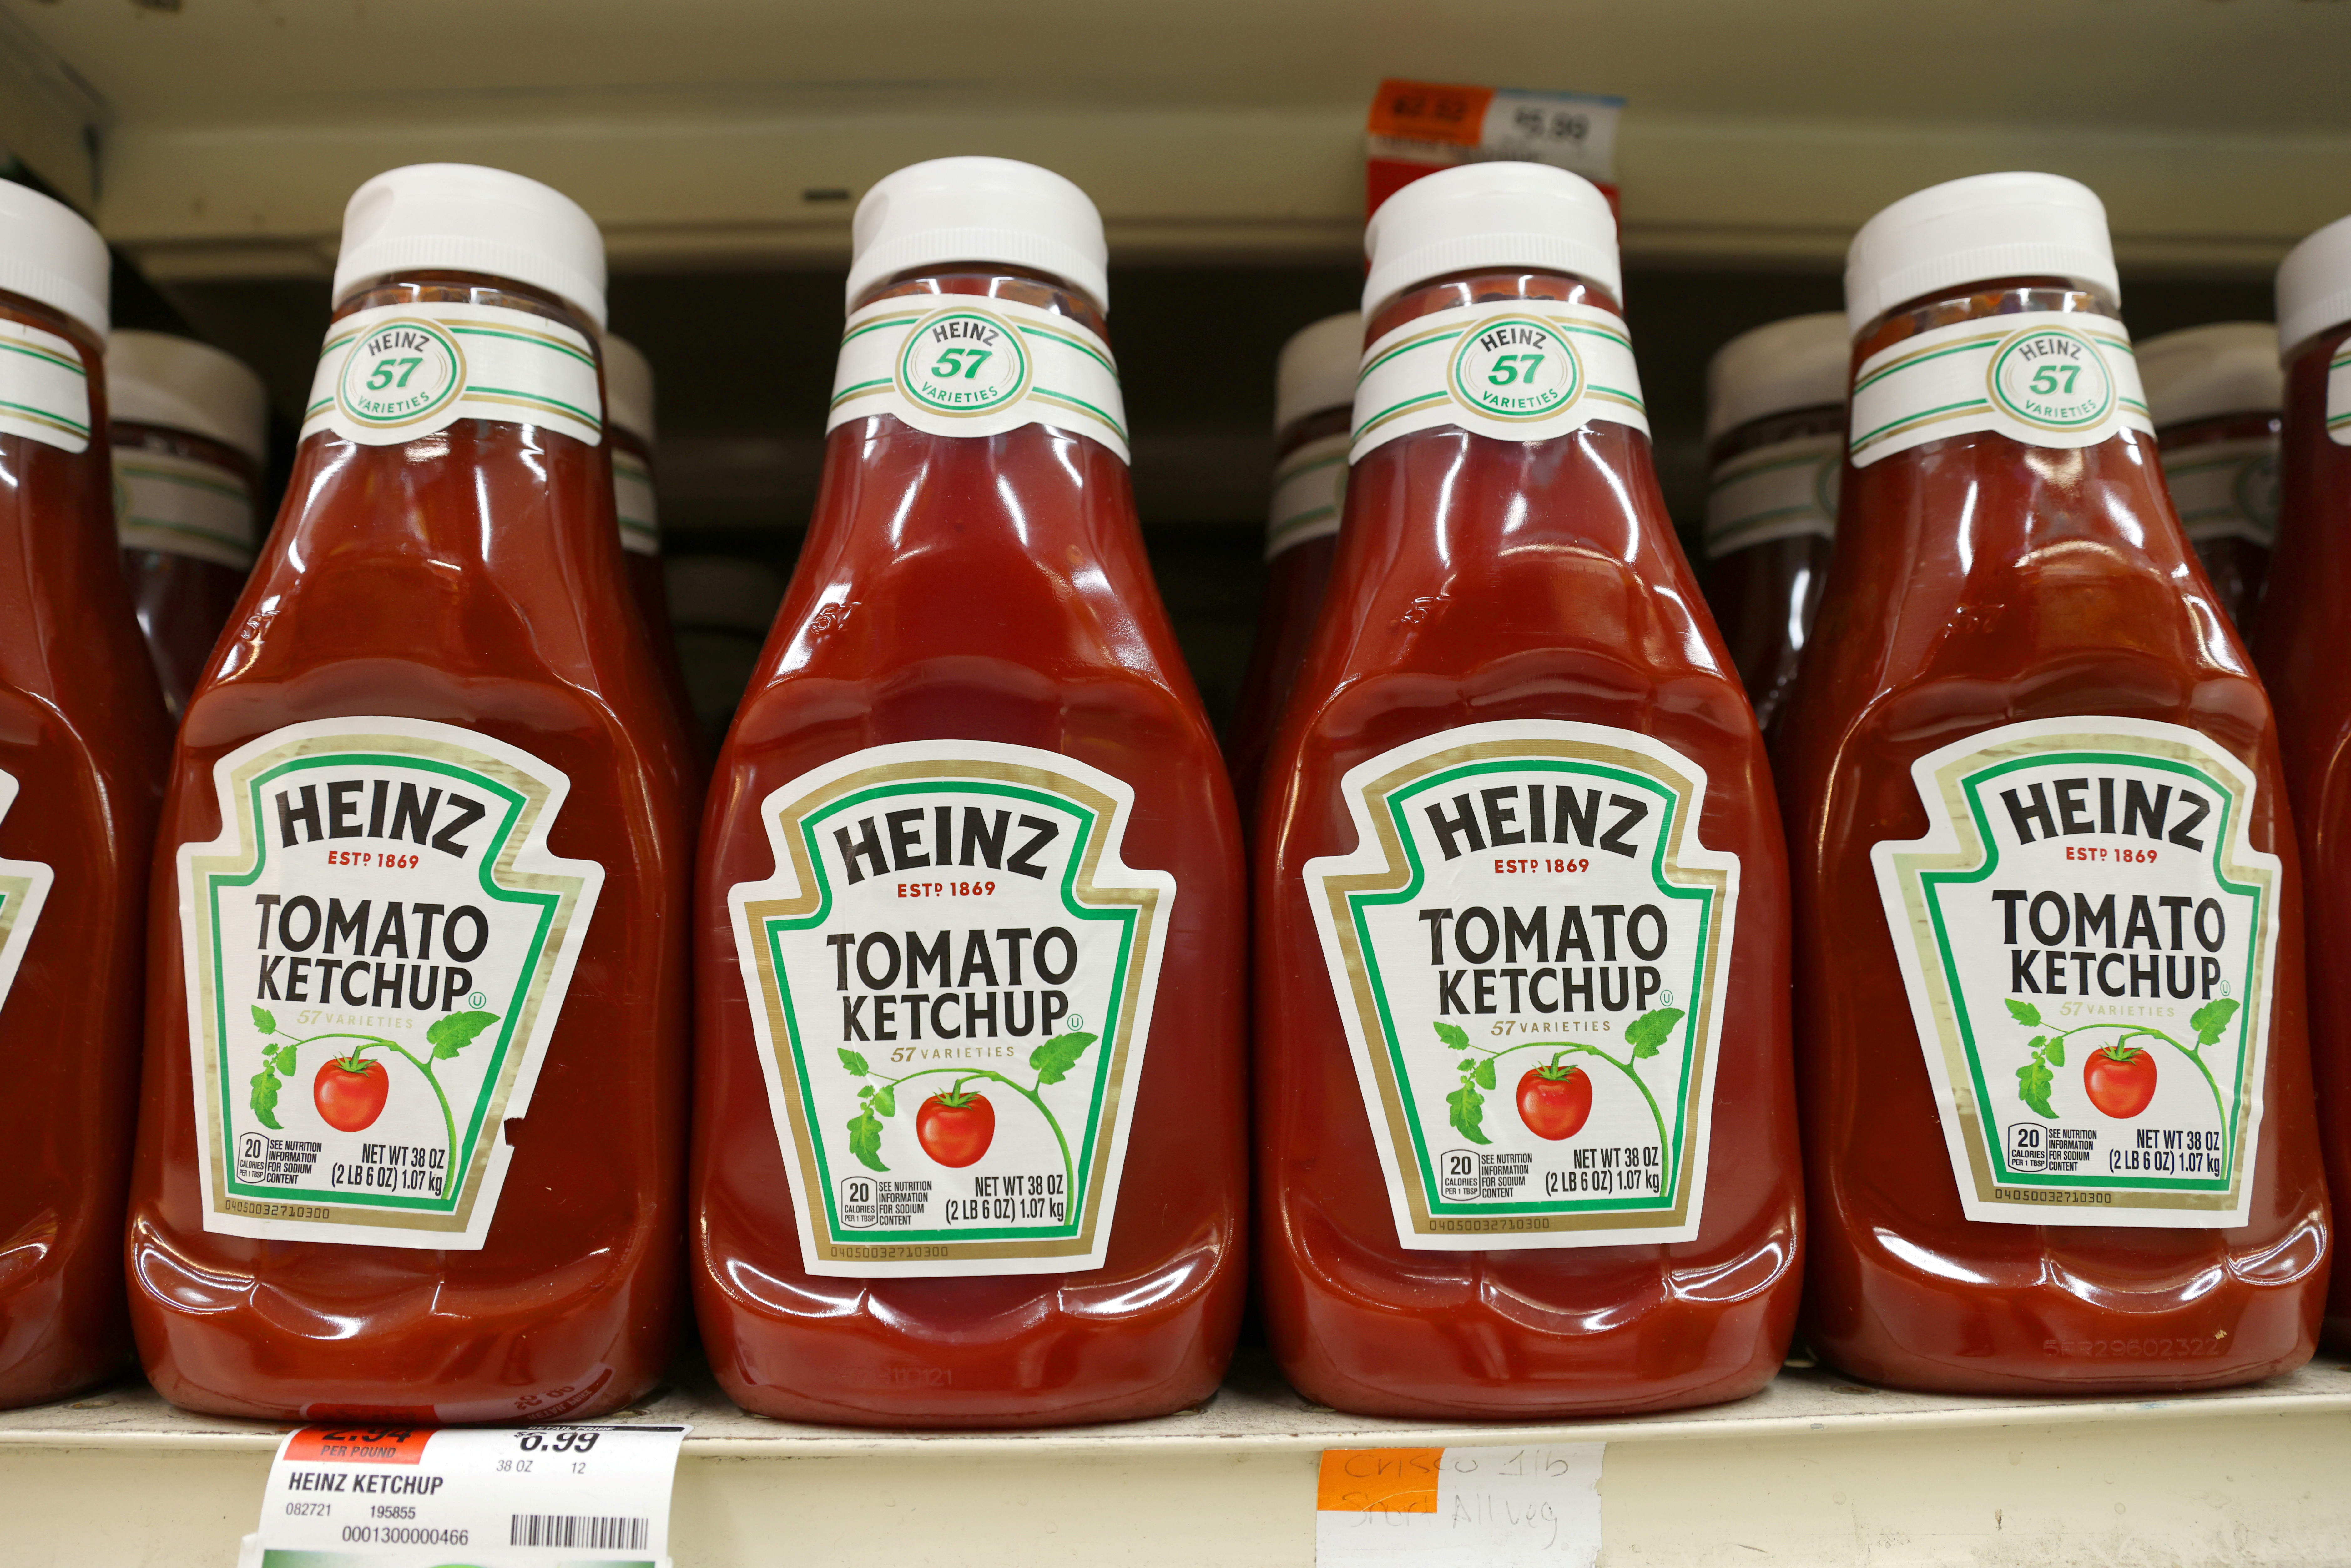 Bottles of Heinz Tomato Ketchup, a brand owned by The Kraft Heinz Company, are seen in a store in Manhattan, New York